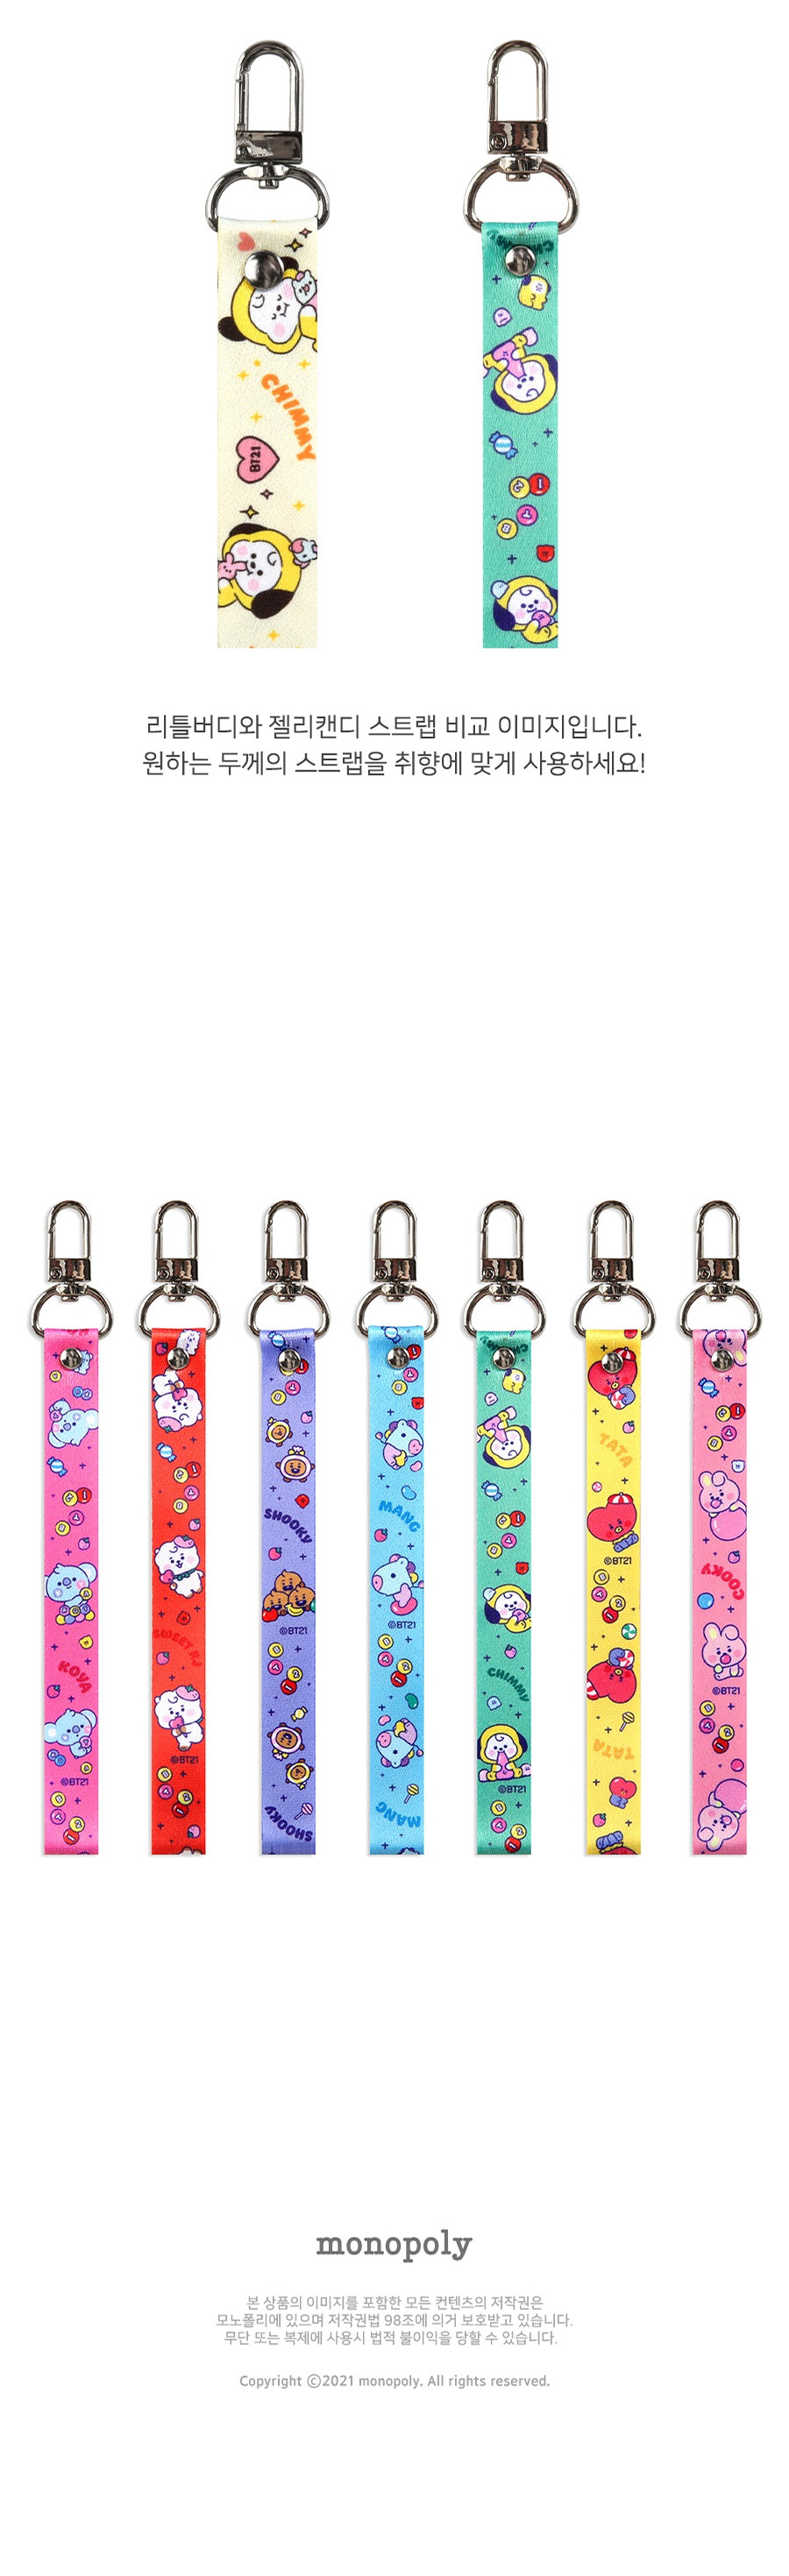 BT21] BT21 X Monopoly Collaboration - Baby Hand Strap Jelly Candy